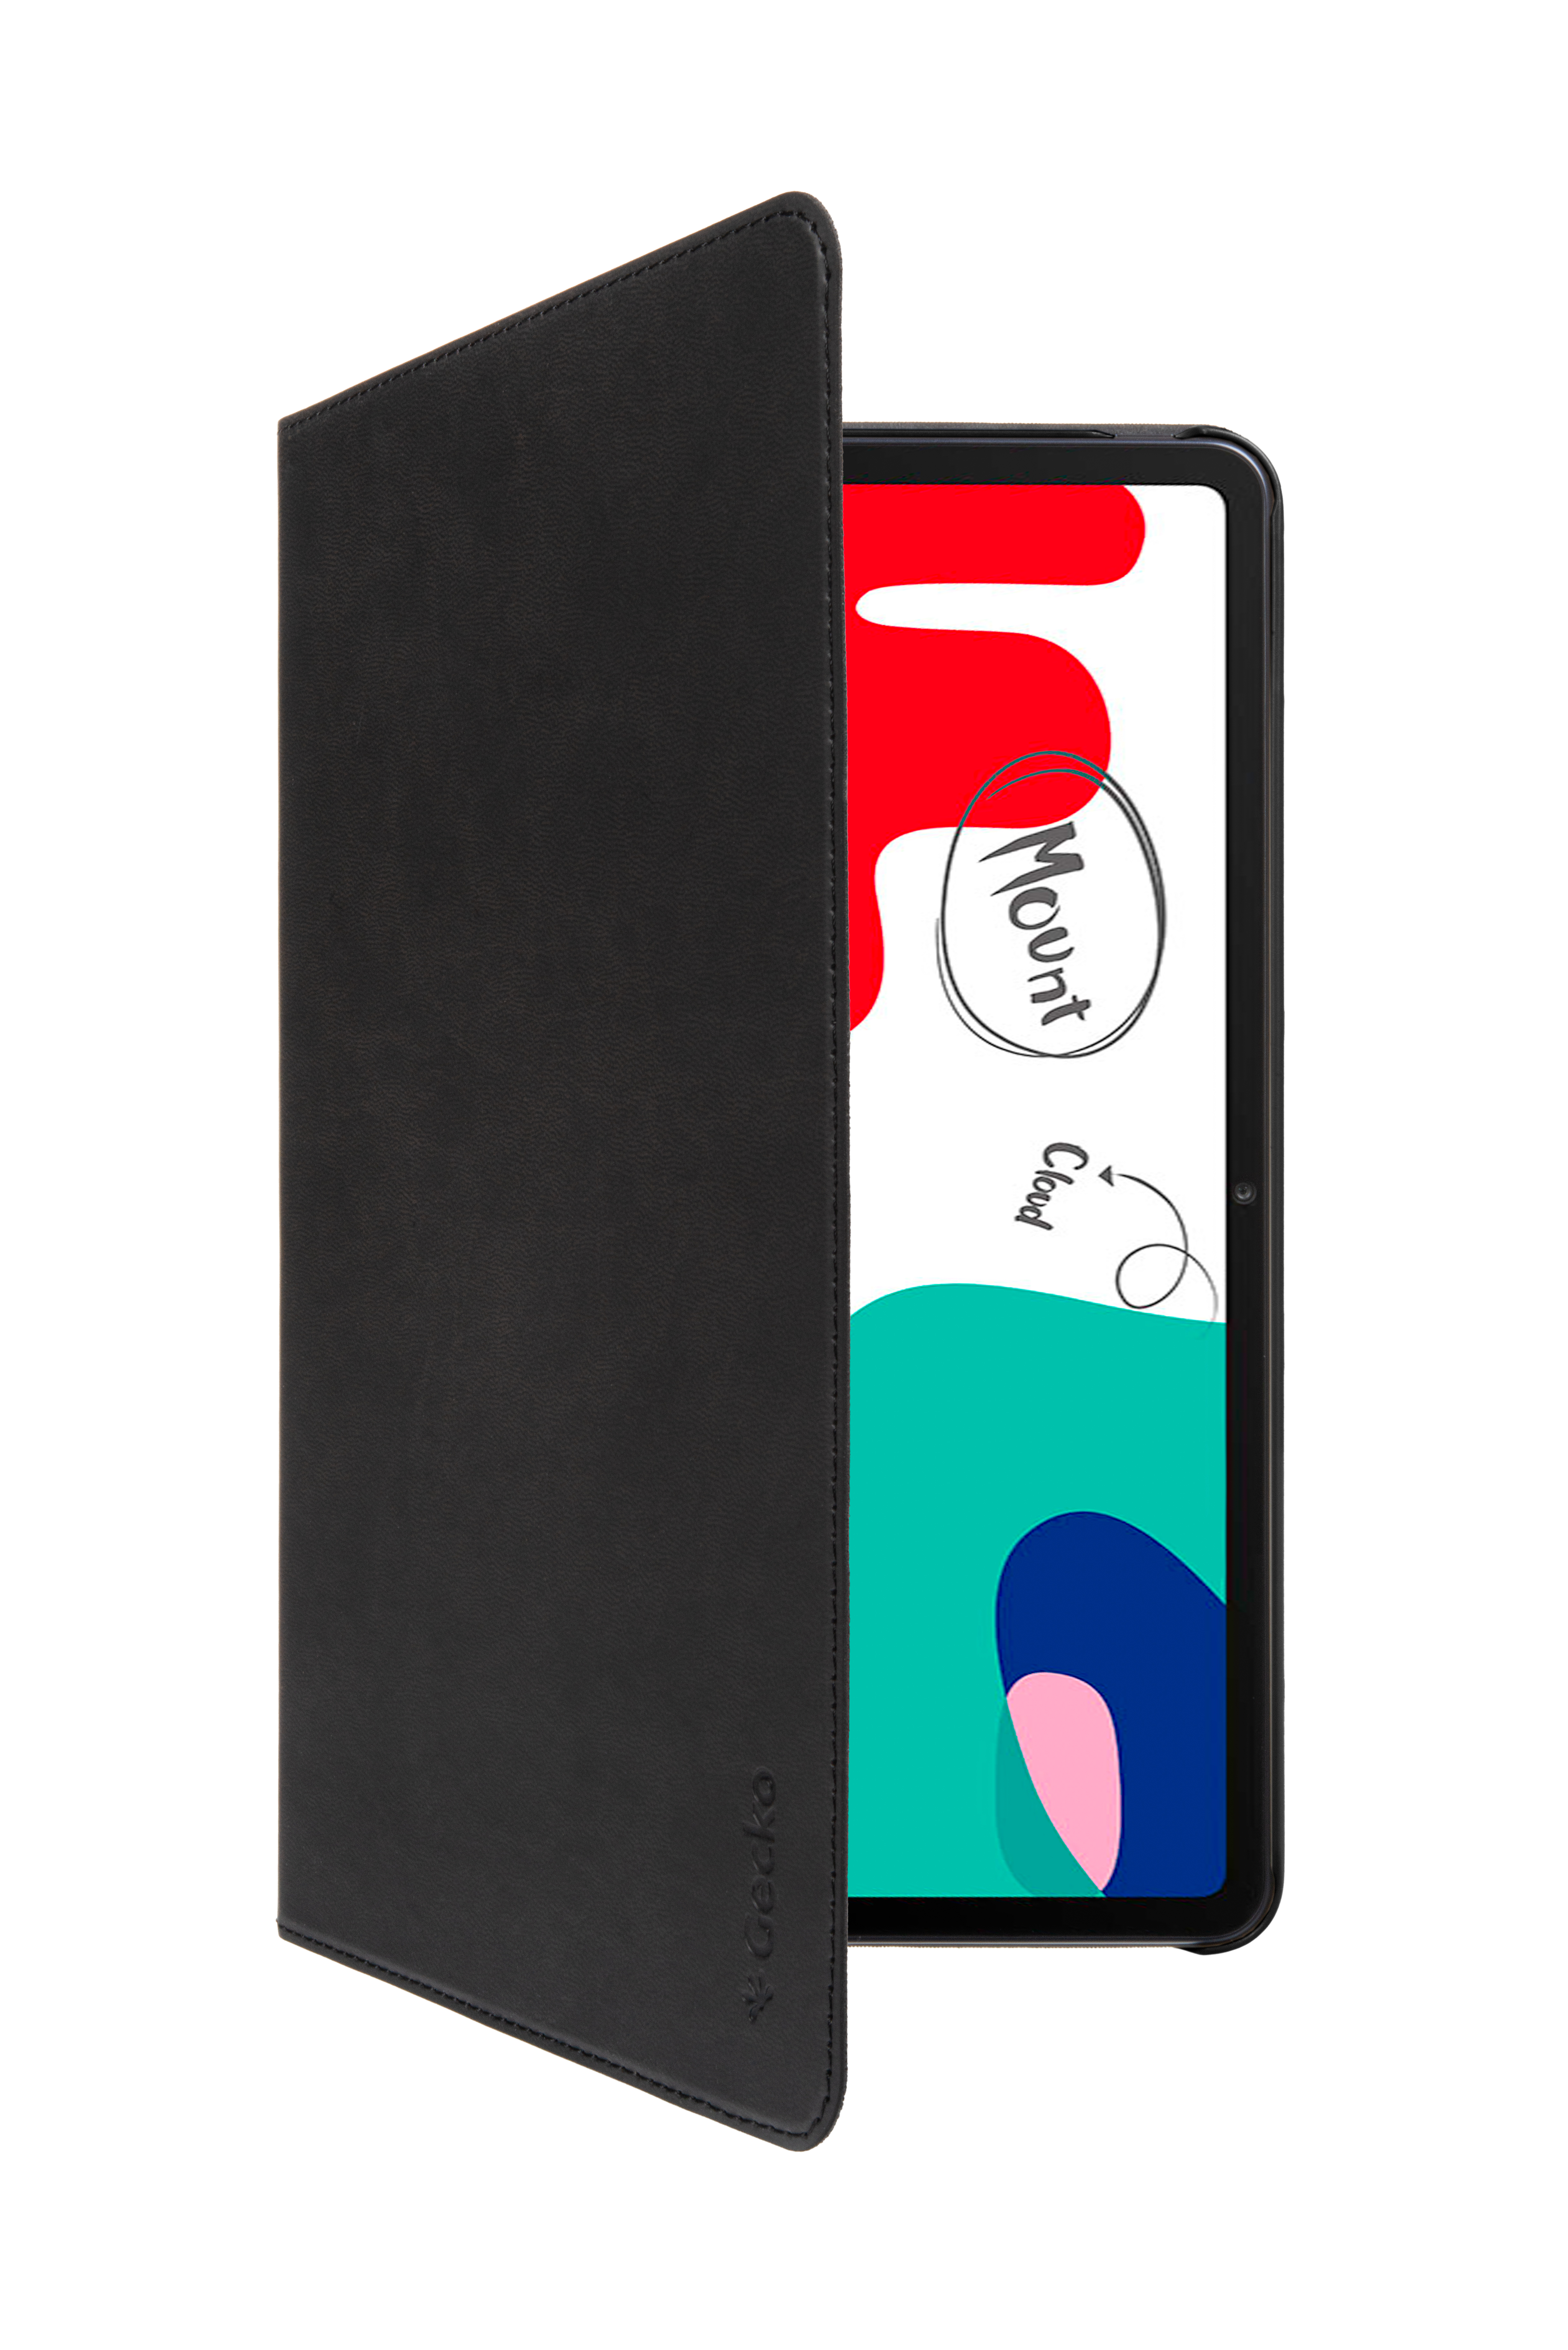 GECKO COVERS Easy-Click 2.0 Bookcover für Leather,PC, Tablet Schwarz PU Hülle Huawei Cover